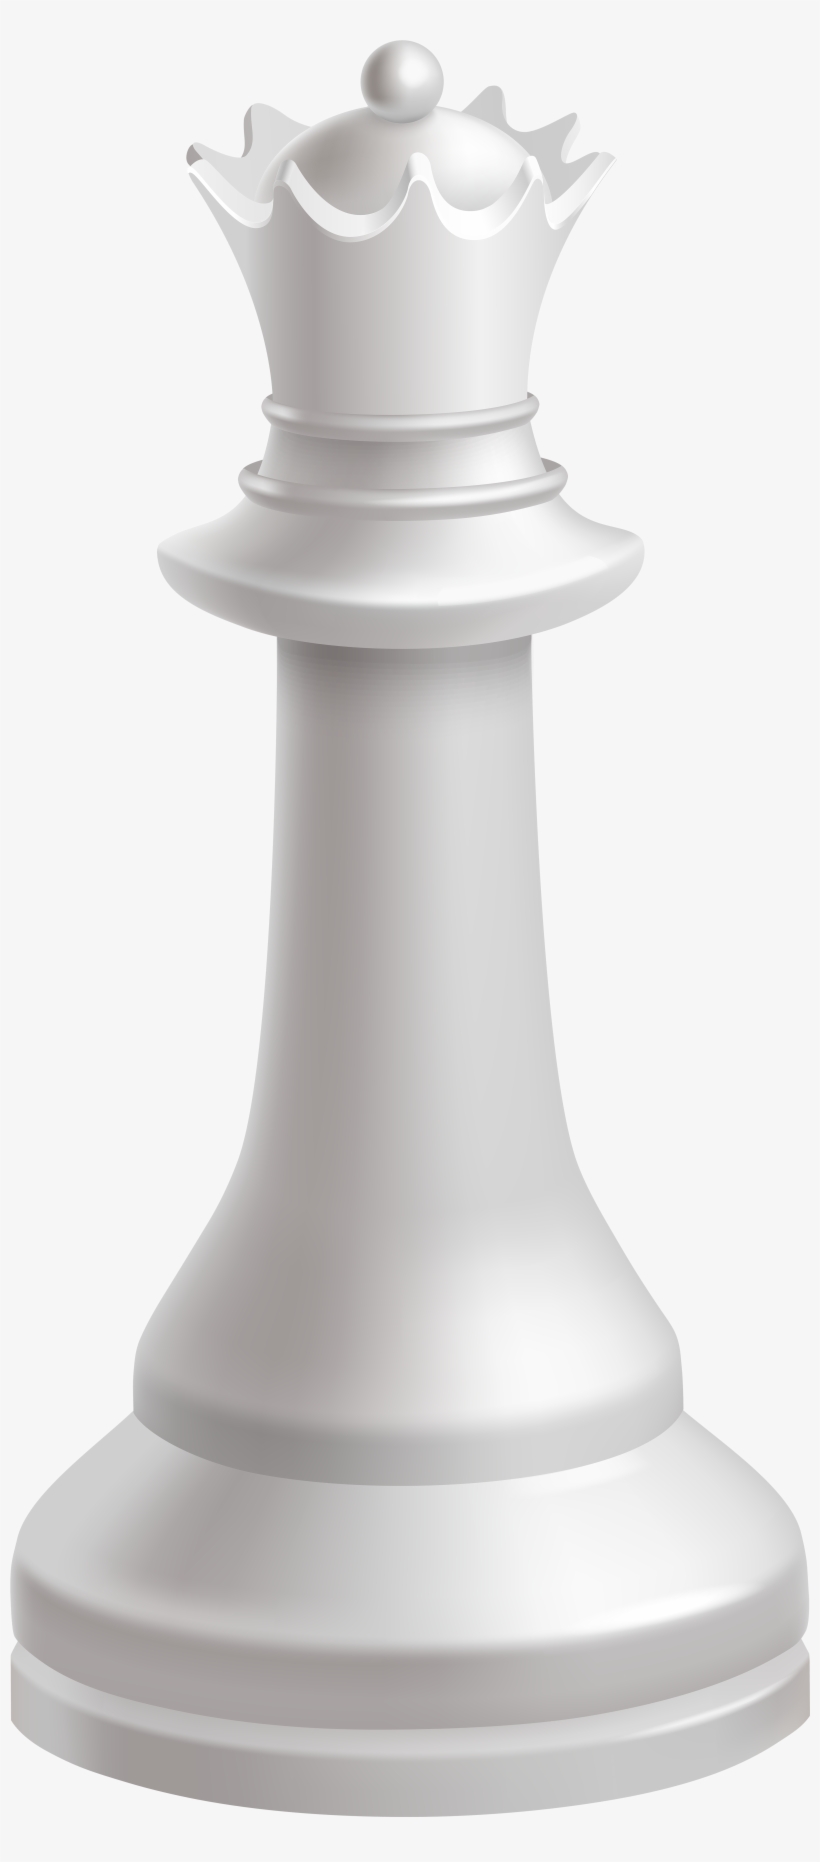 Free Png Queen White Chess Piece Png Images Transparent - King Chess Piece Png, transparent png #2185549